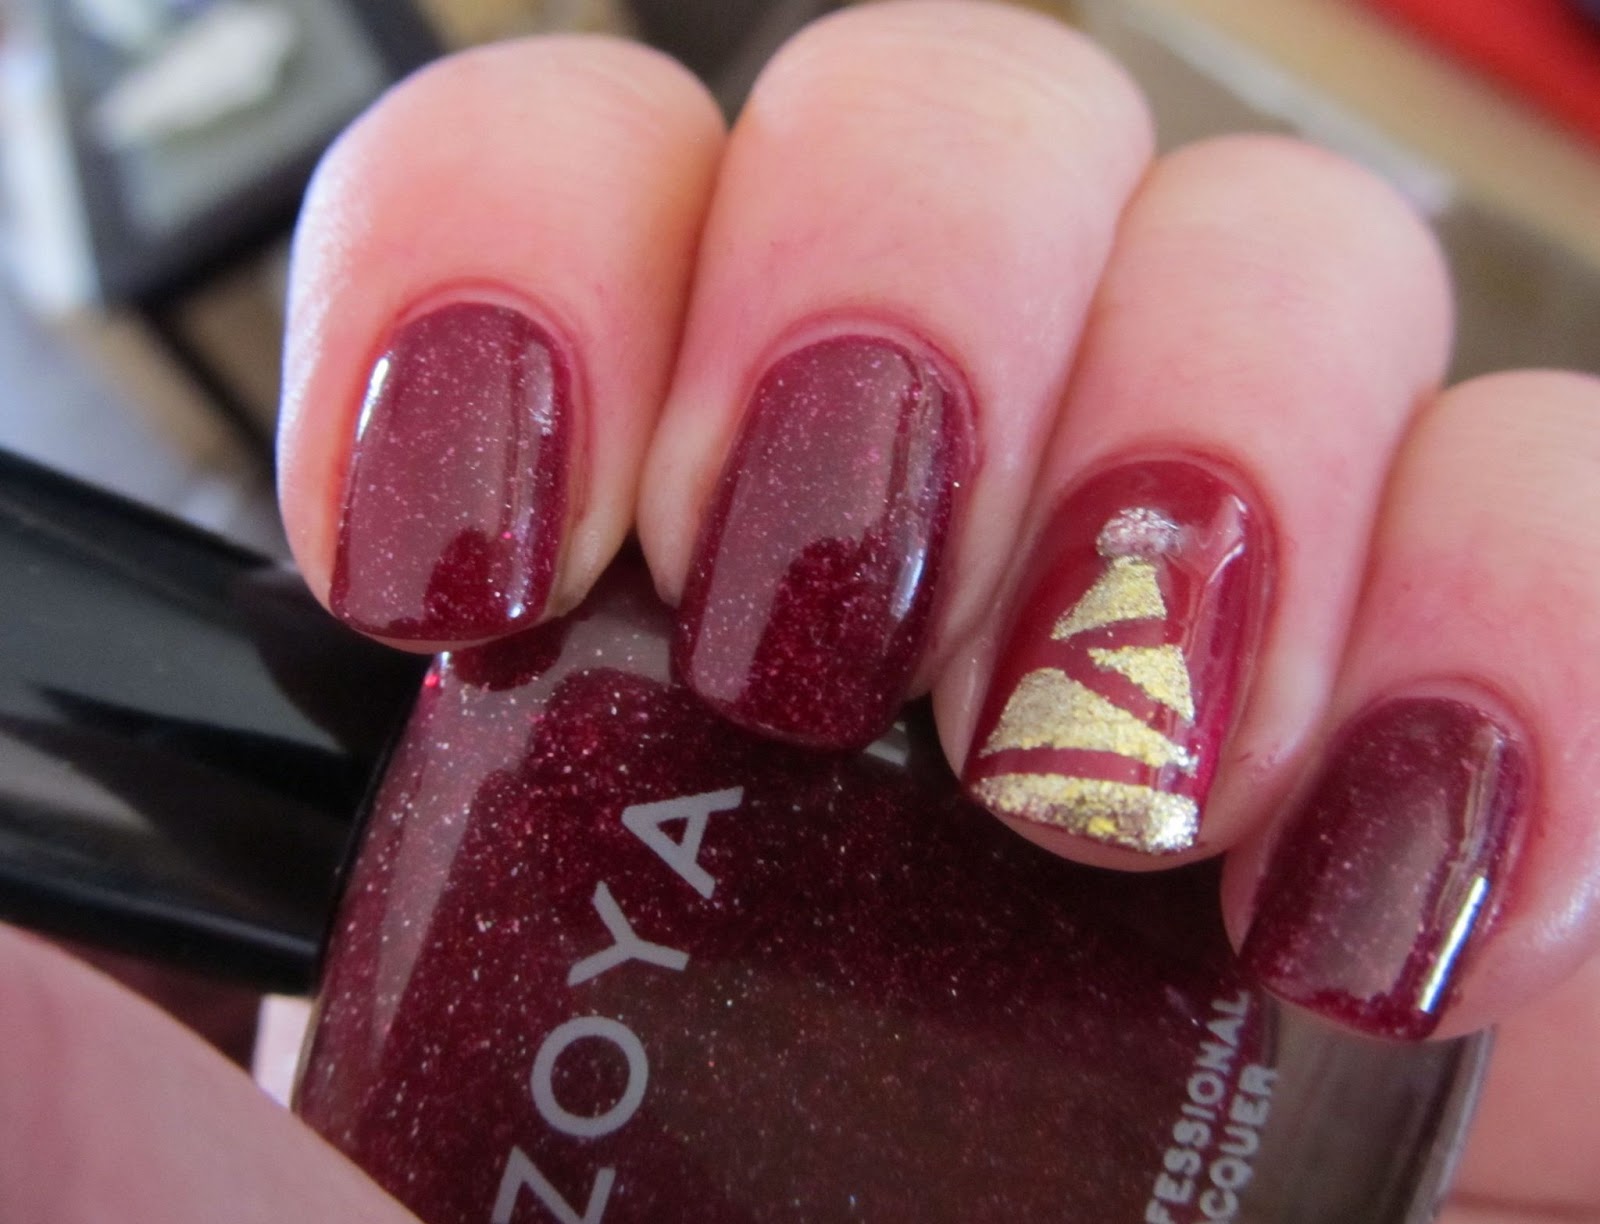 It's all about the polish: 12 days of Christmas Day One challenge